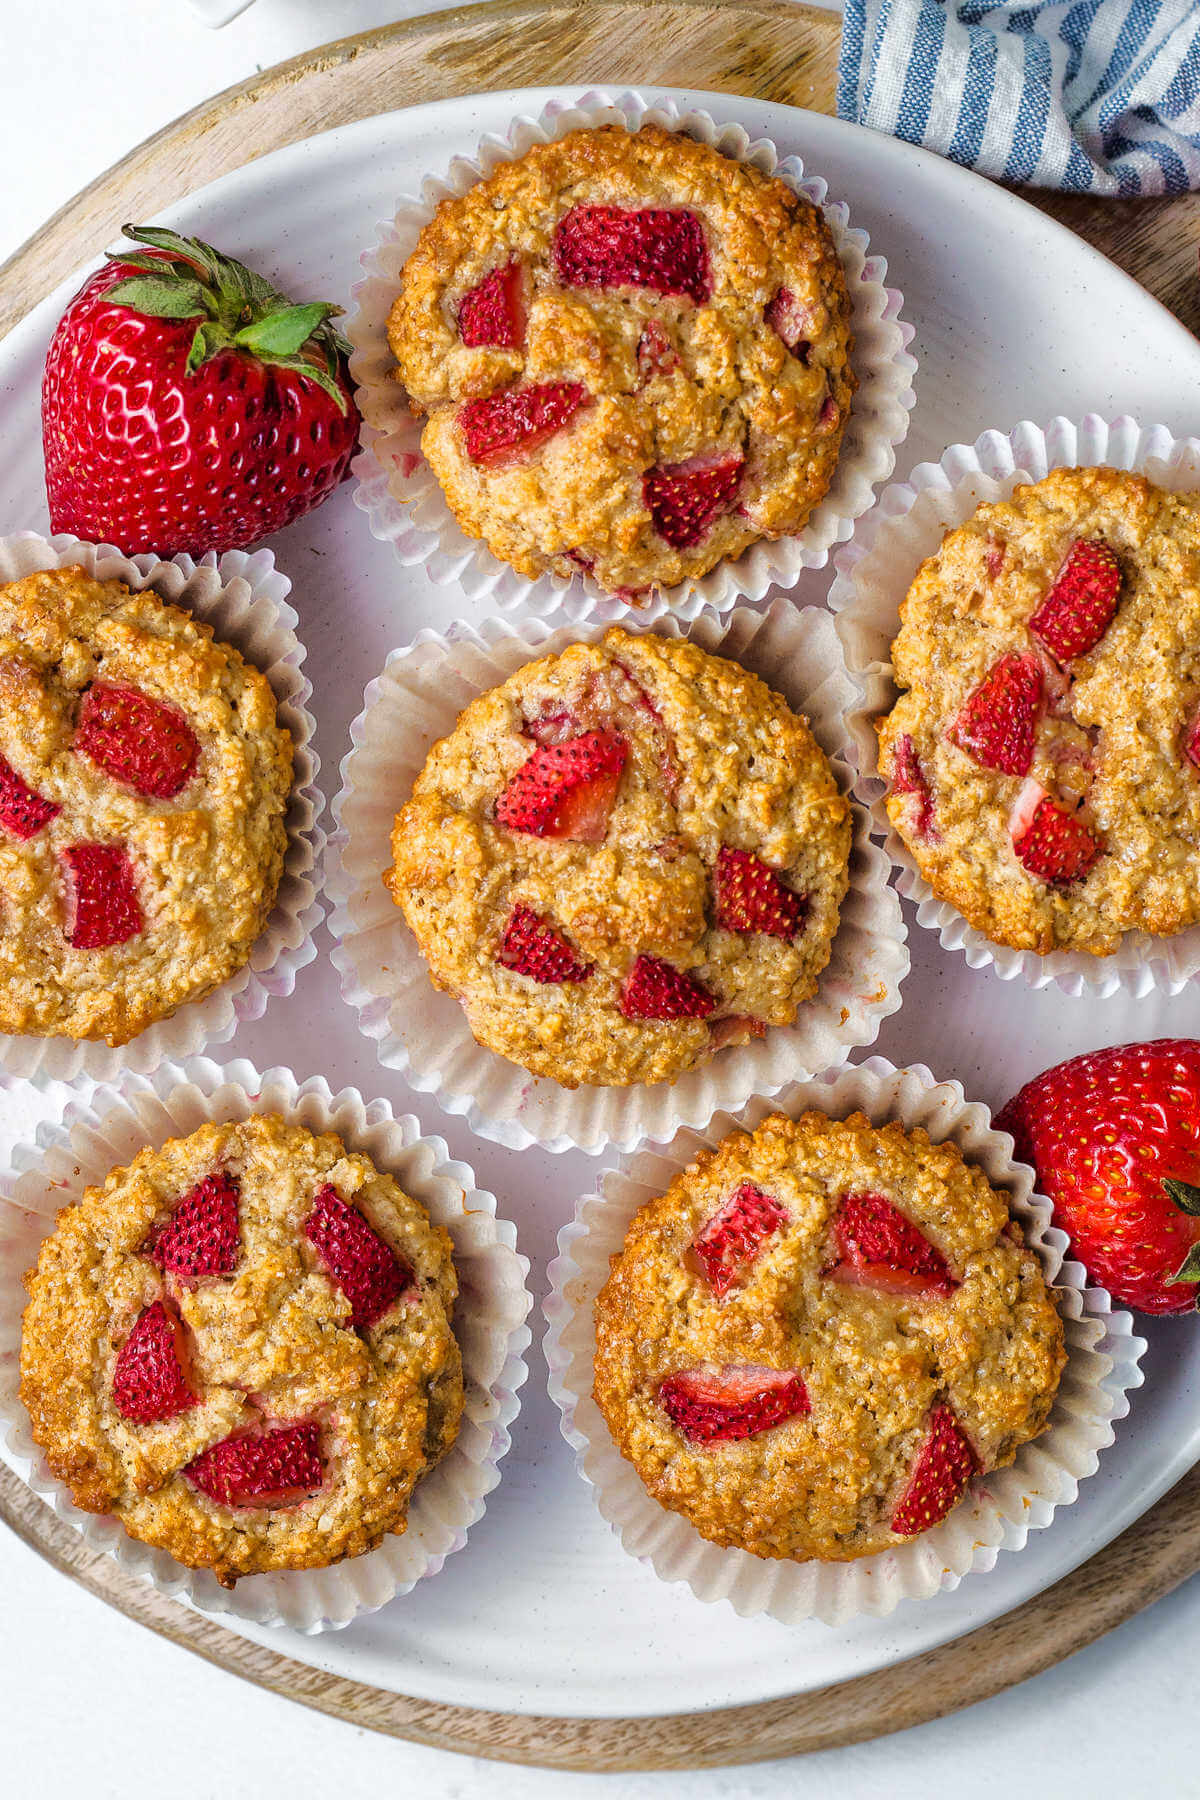 a half dozen strawberry oat muffins on a white plate with strawberry to the side on a table.